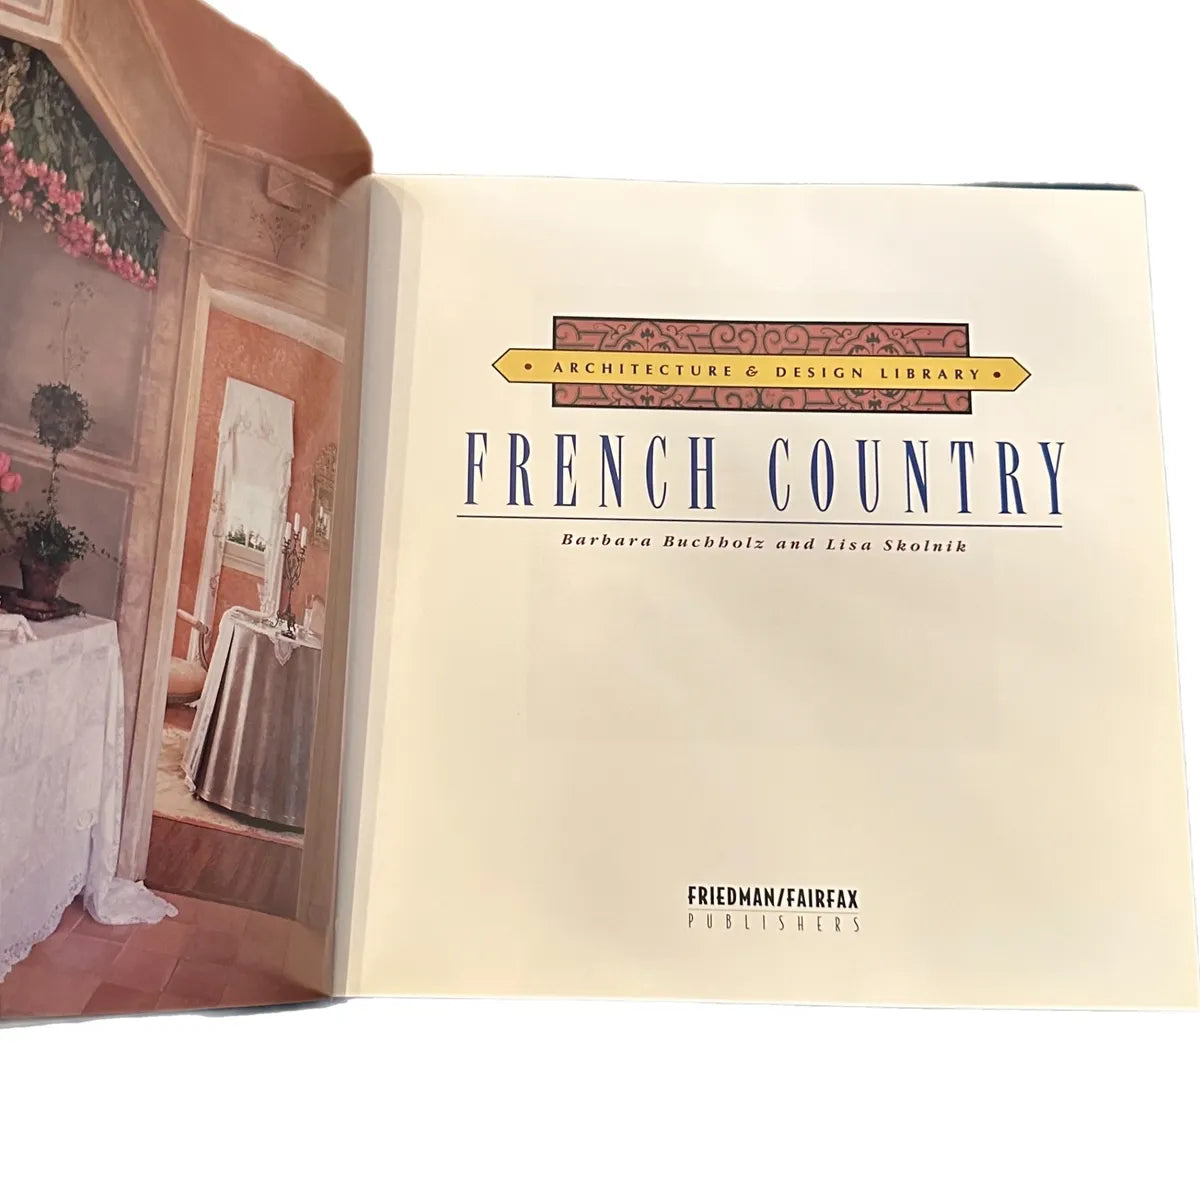 FRENCH COUNTRY [Architecture & Design Library] (1996) by Barbara Buchholz and Lisa Skolnik